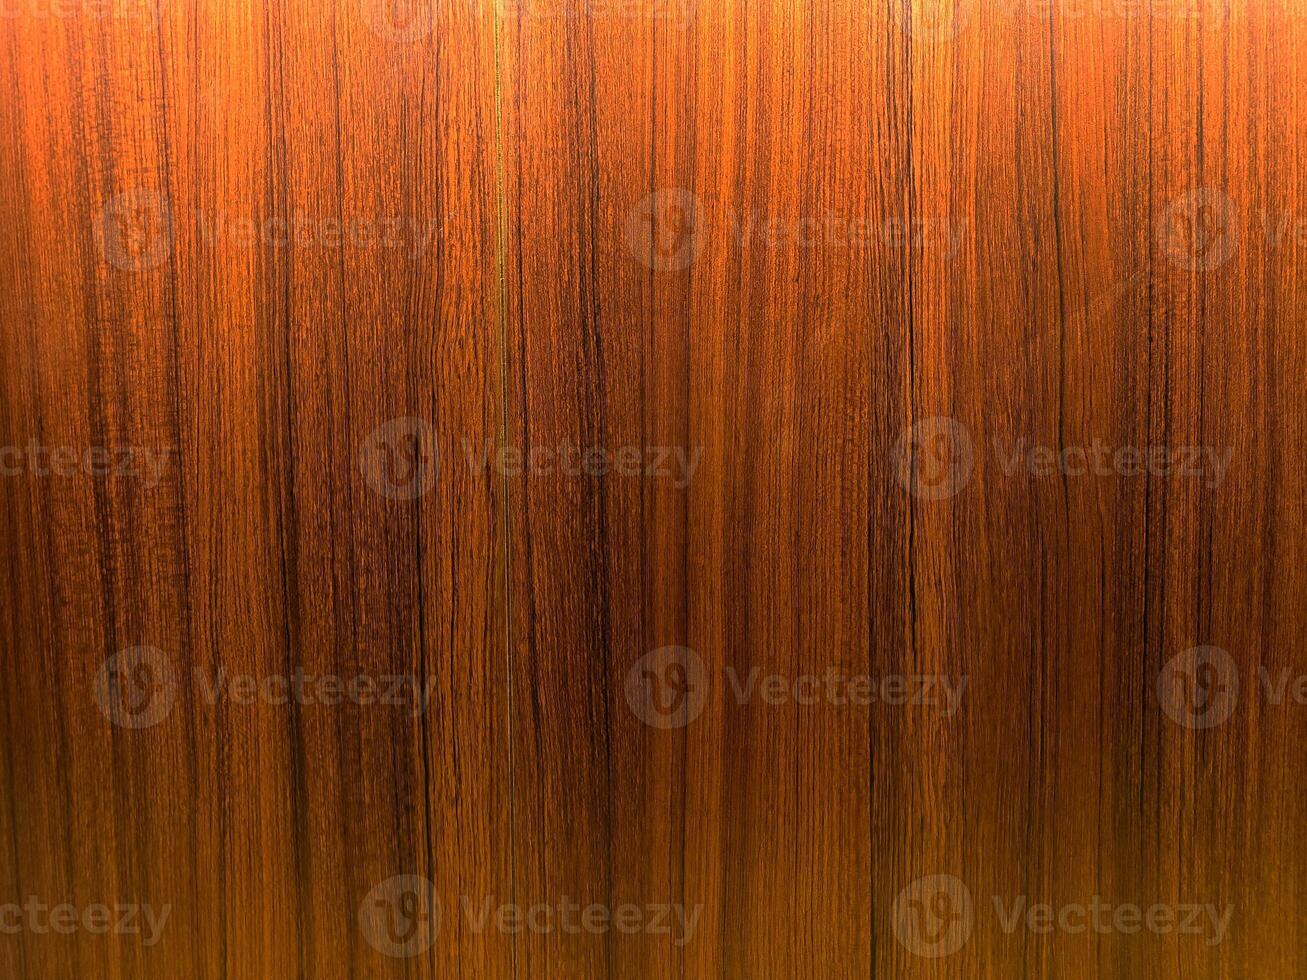 Teakwood texture for background or wallpaper photo